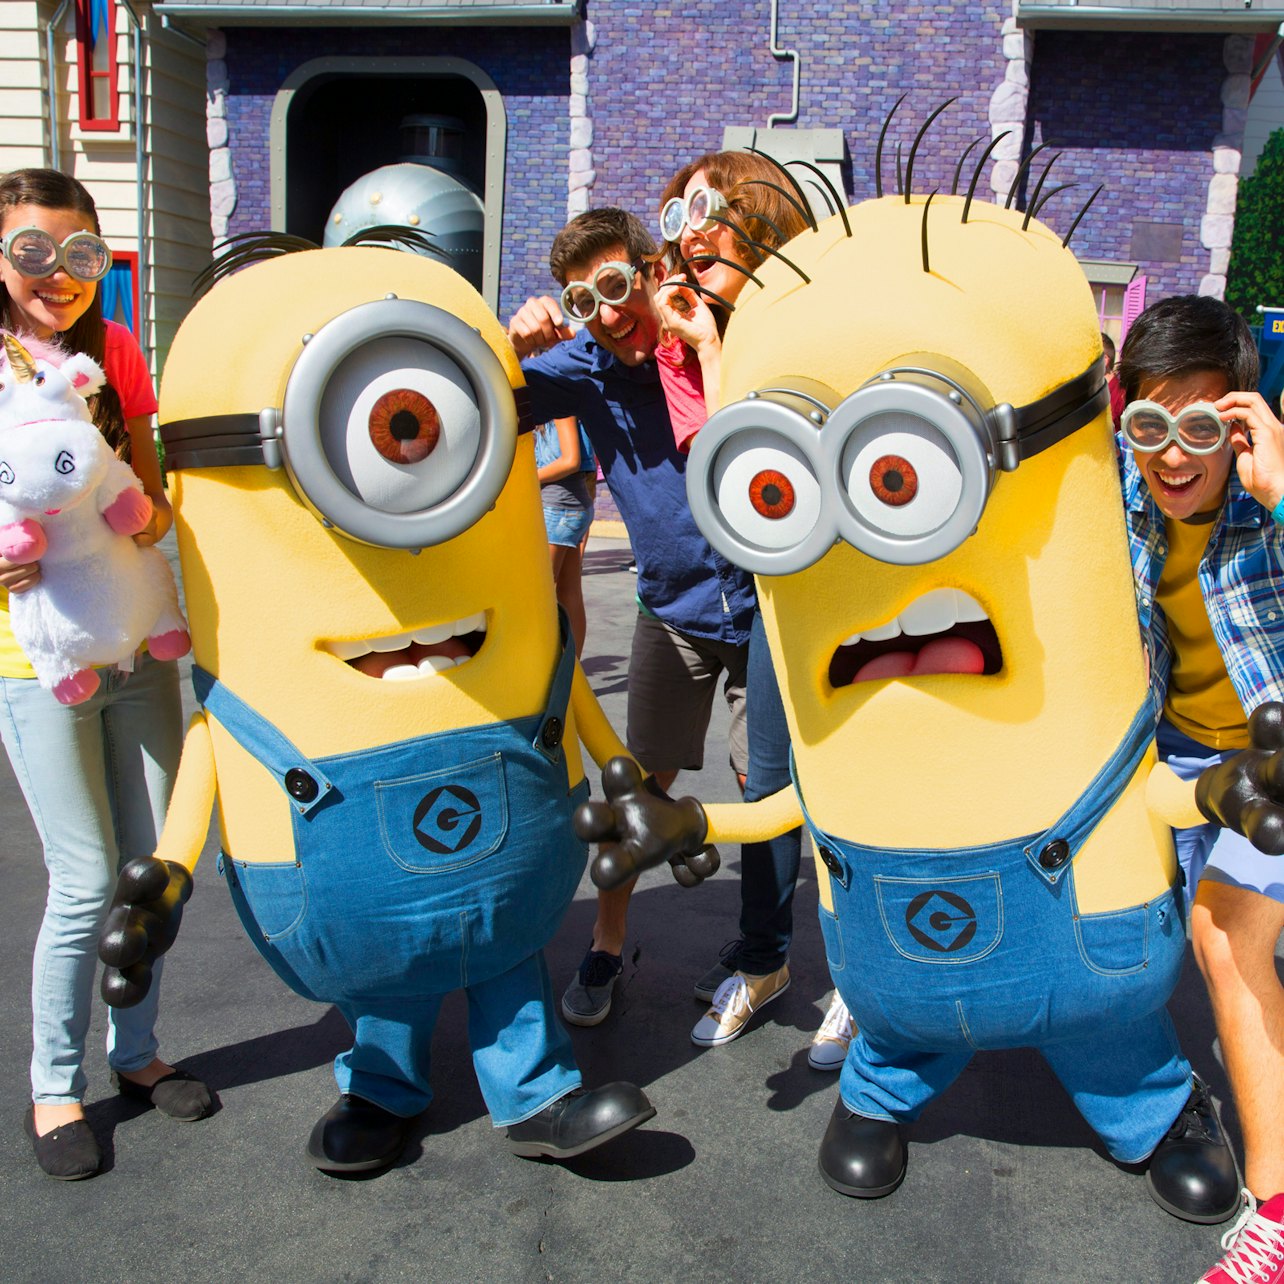 Universal Studios Hollywood - Accommodations in Los Angeles